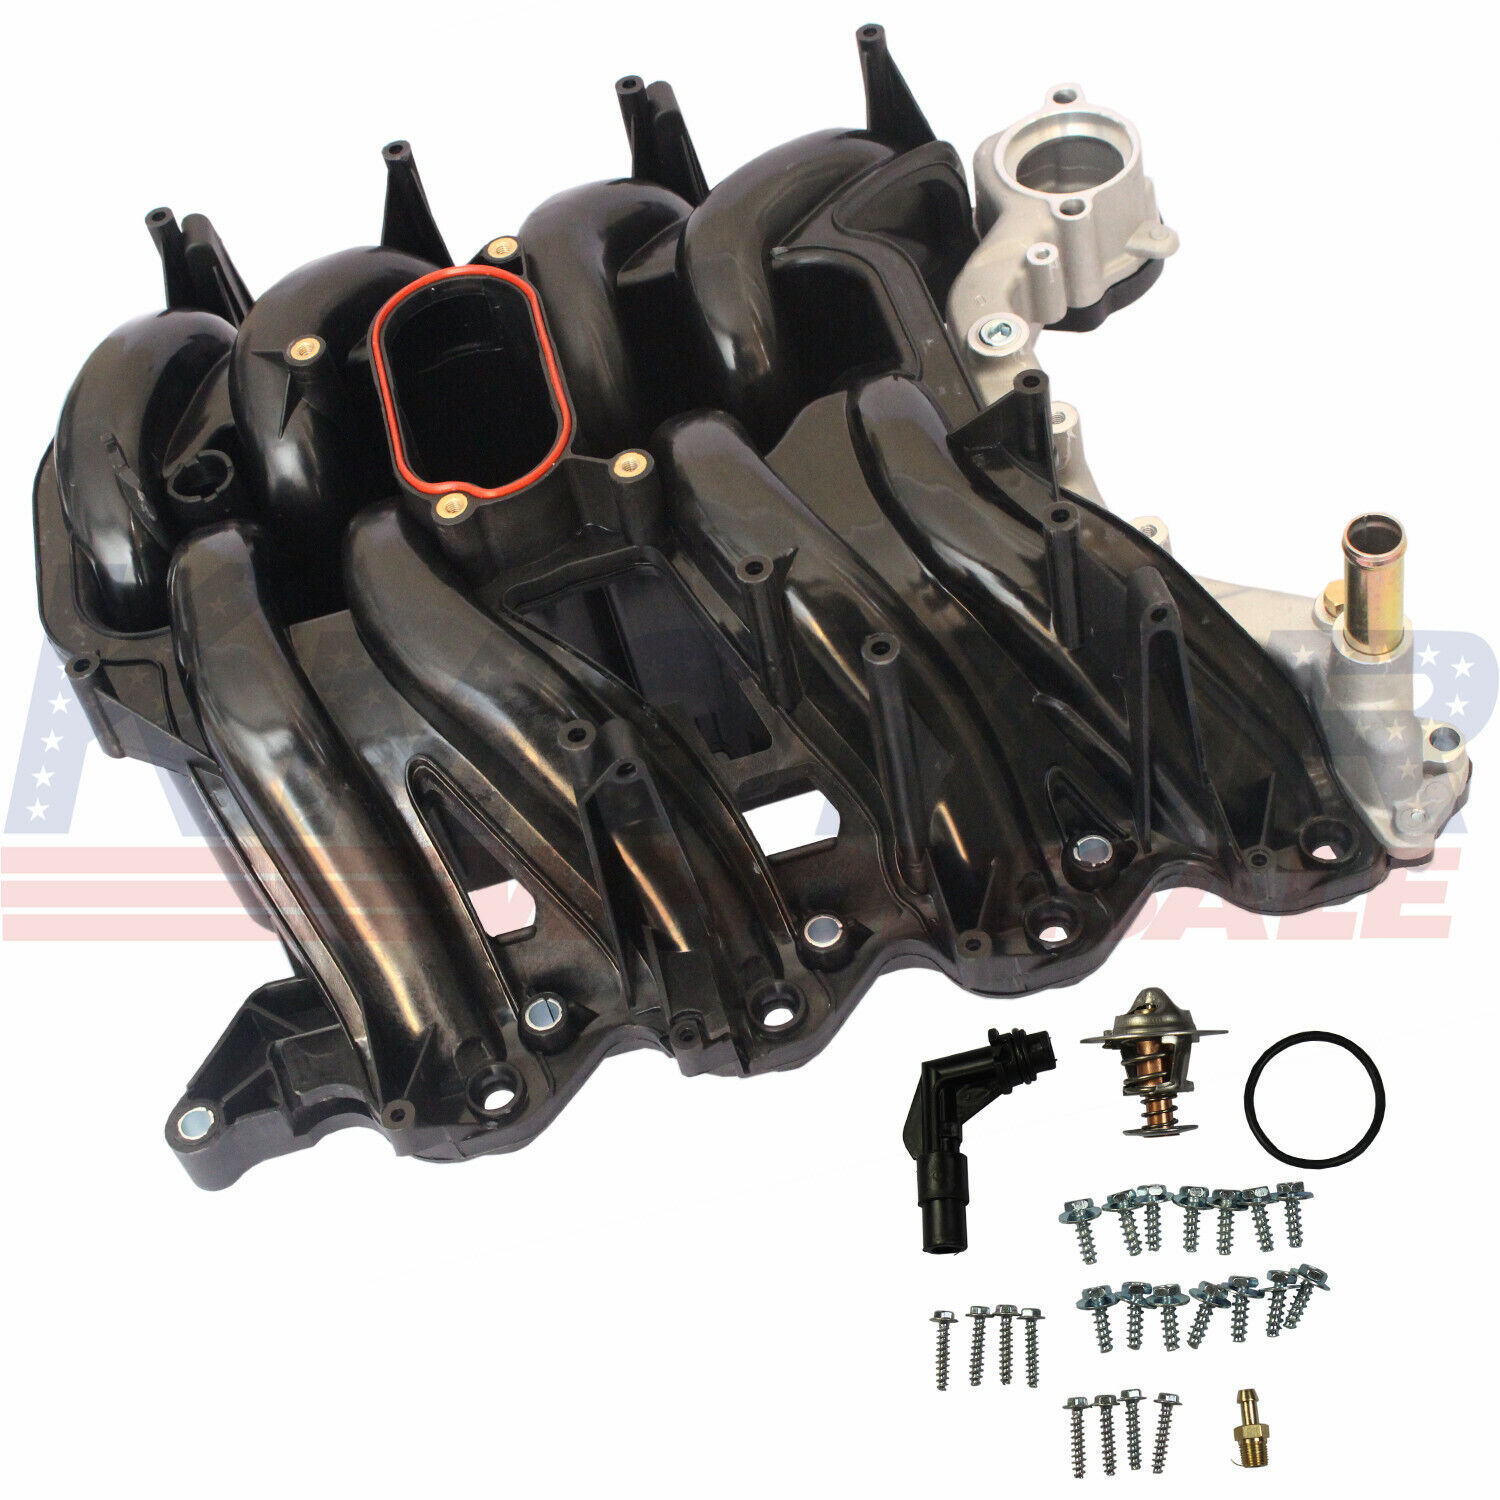 Upper Intake Manifold With Gaskets For Ford F-Series E-Series 5.4L Pickup Truck